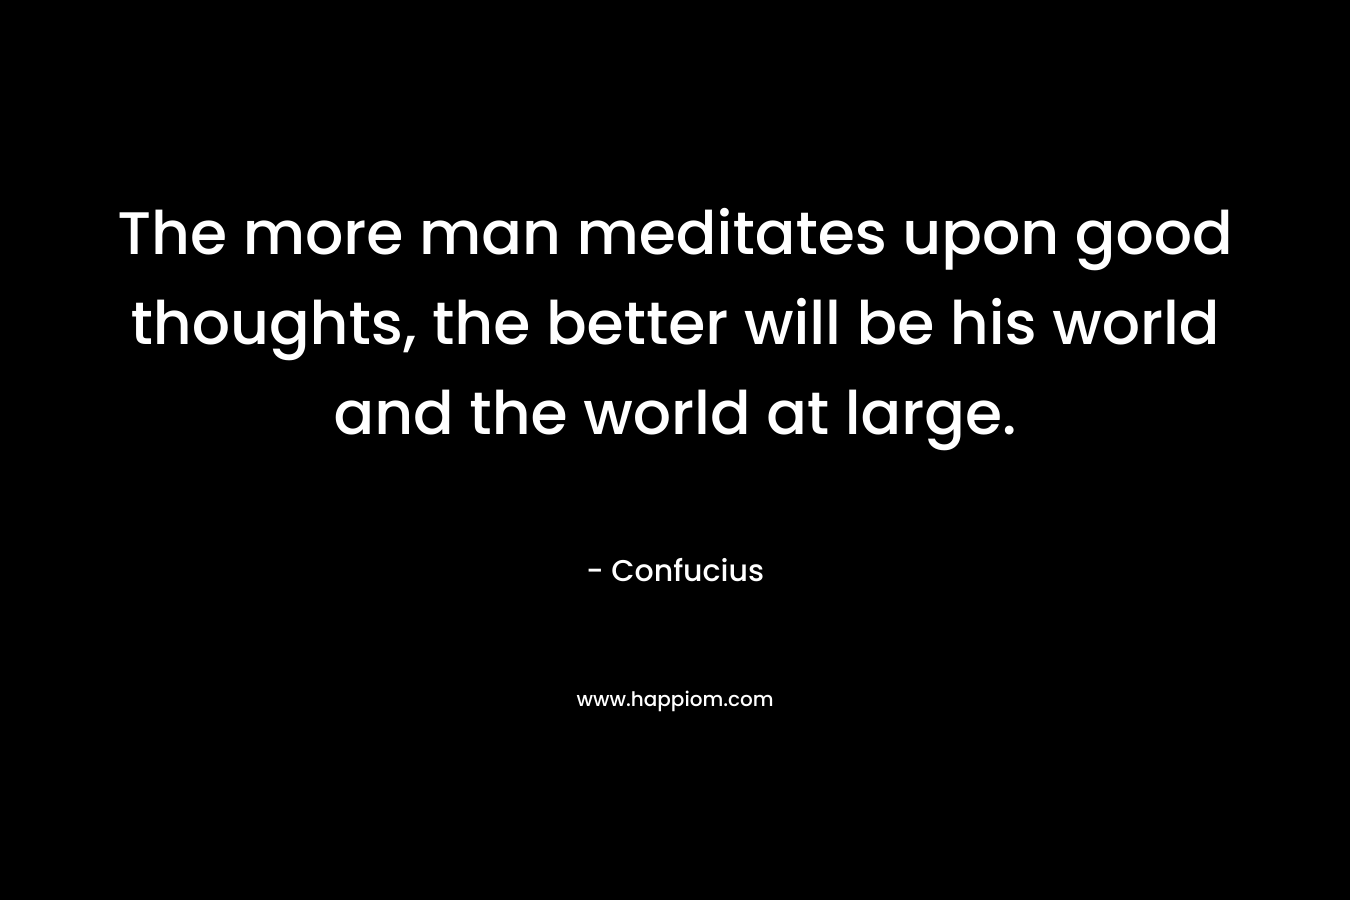 The more man meditates upon good thoughts, the better will be his world and the world at large.